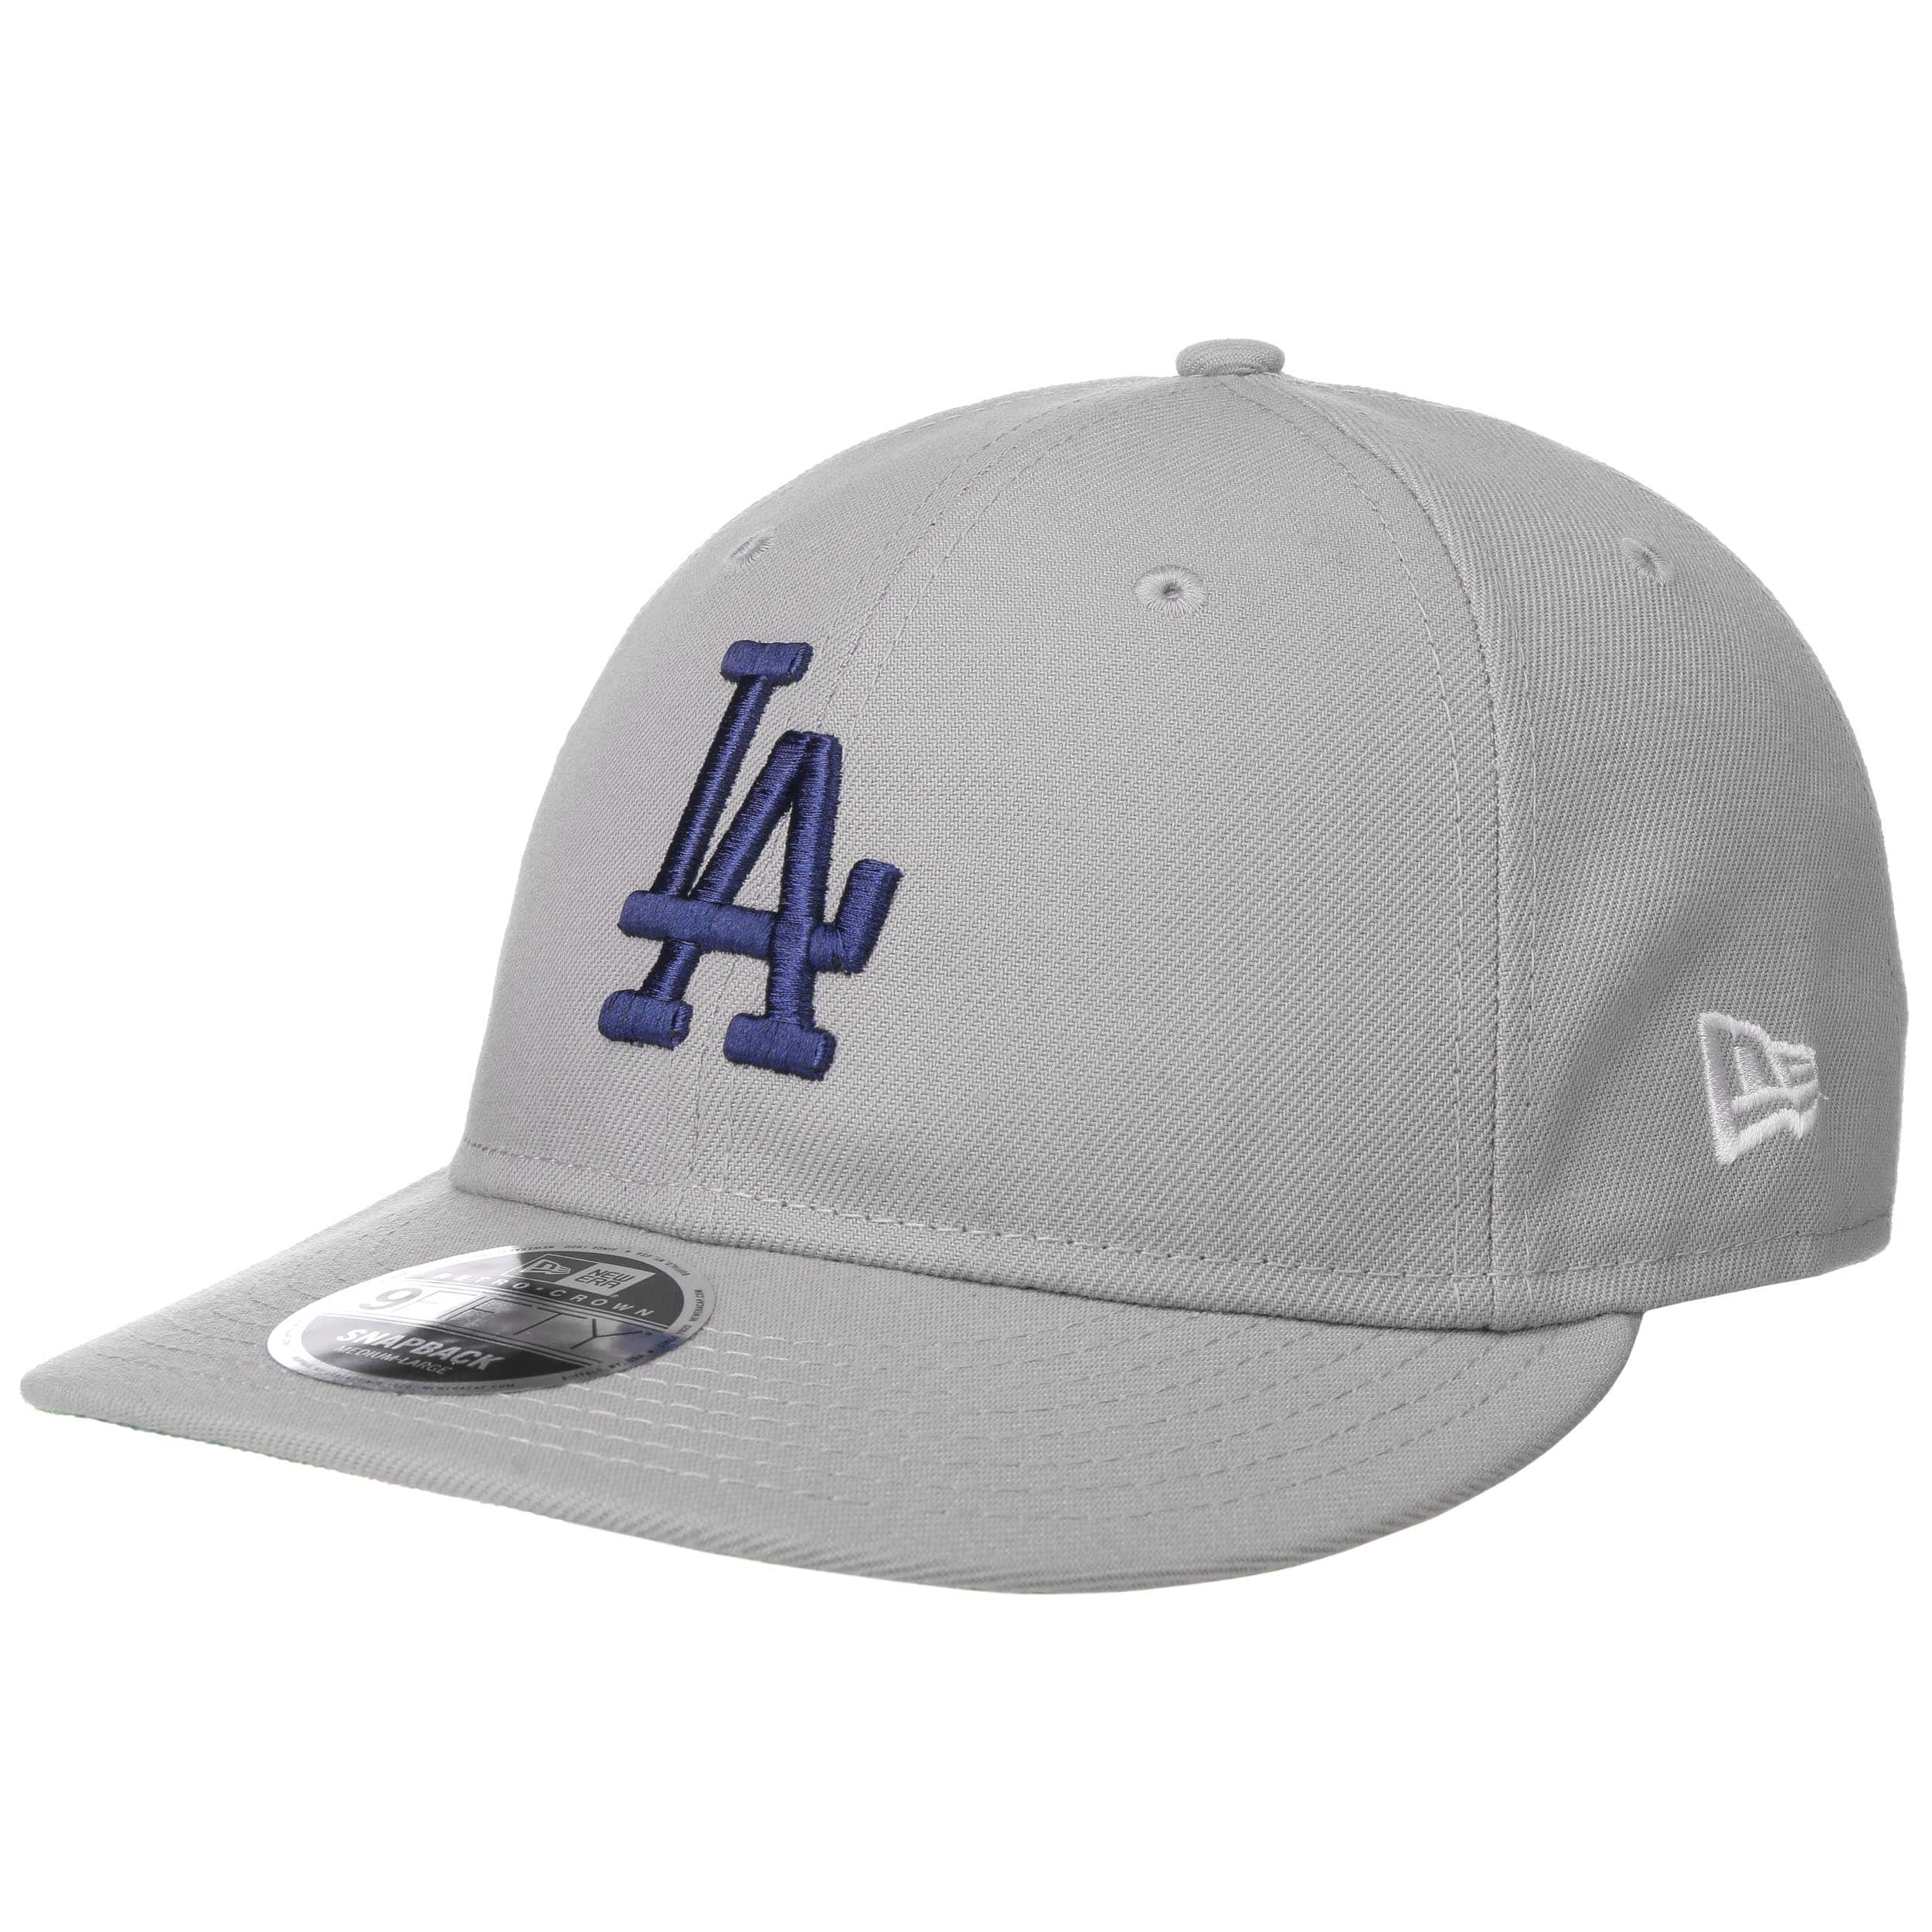 9Fifty Retro Crown Dodgers Cap by New Era